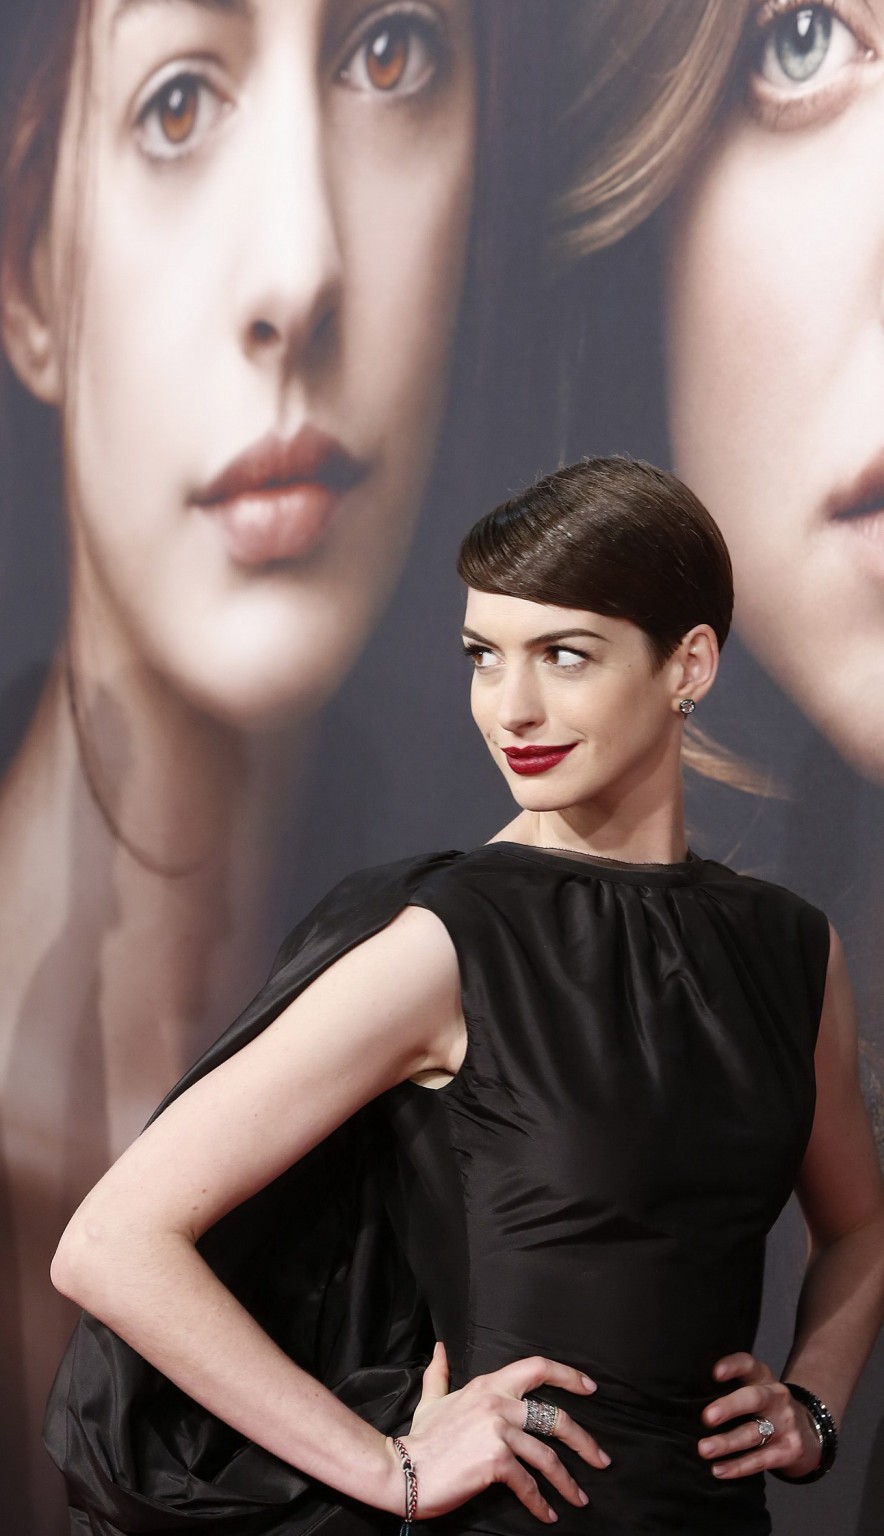 Anne Hathaway flashing her pussy at 'Les Miserables' premiere in NYC #75246418